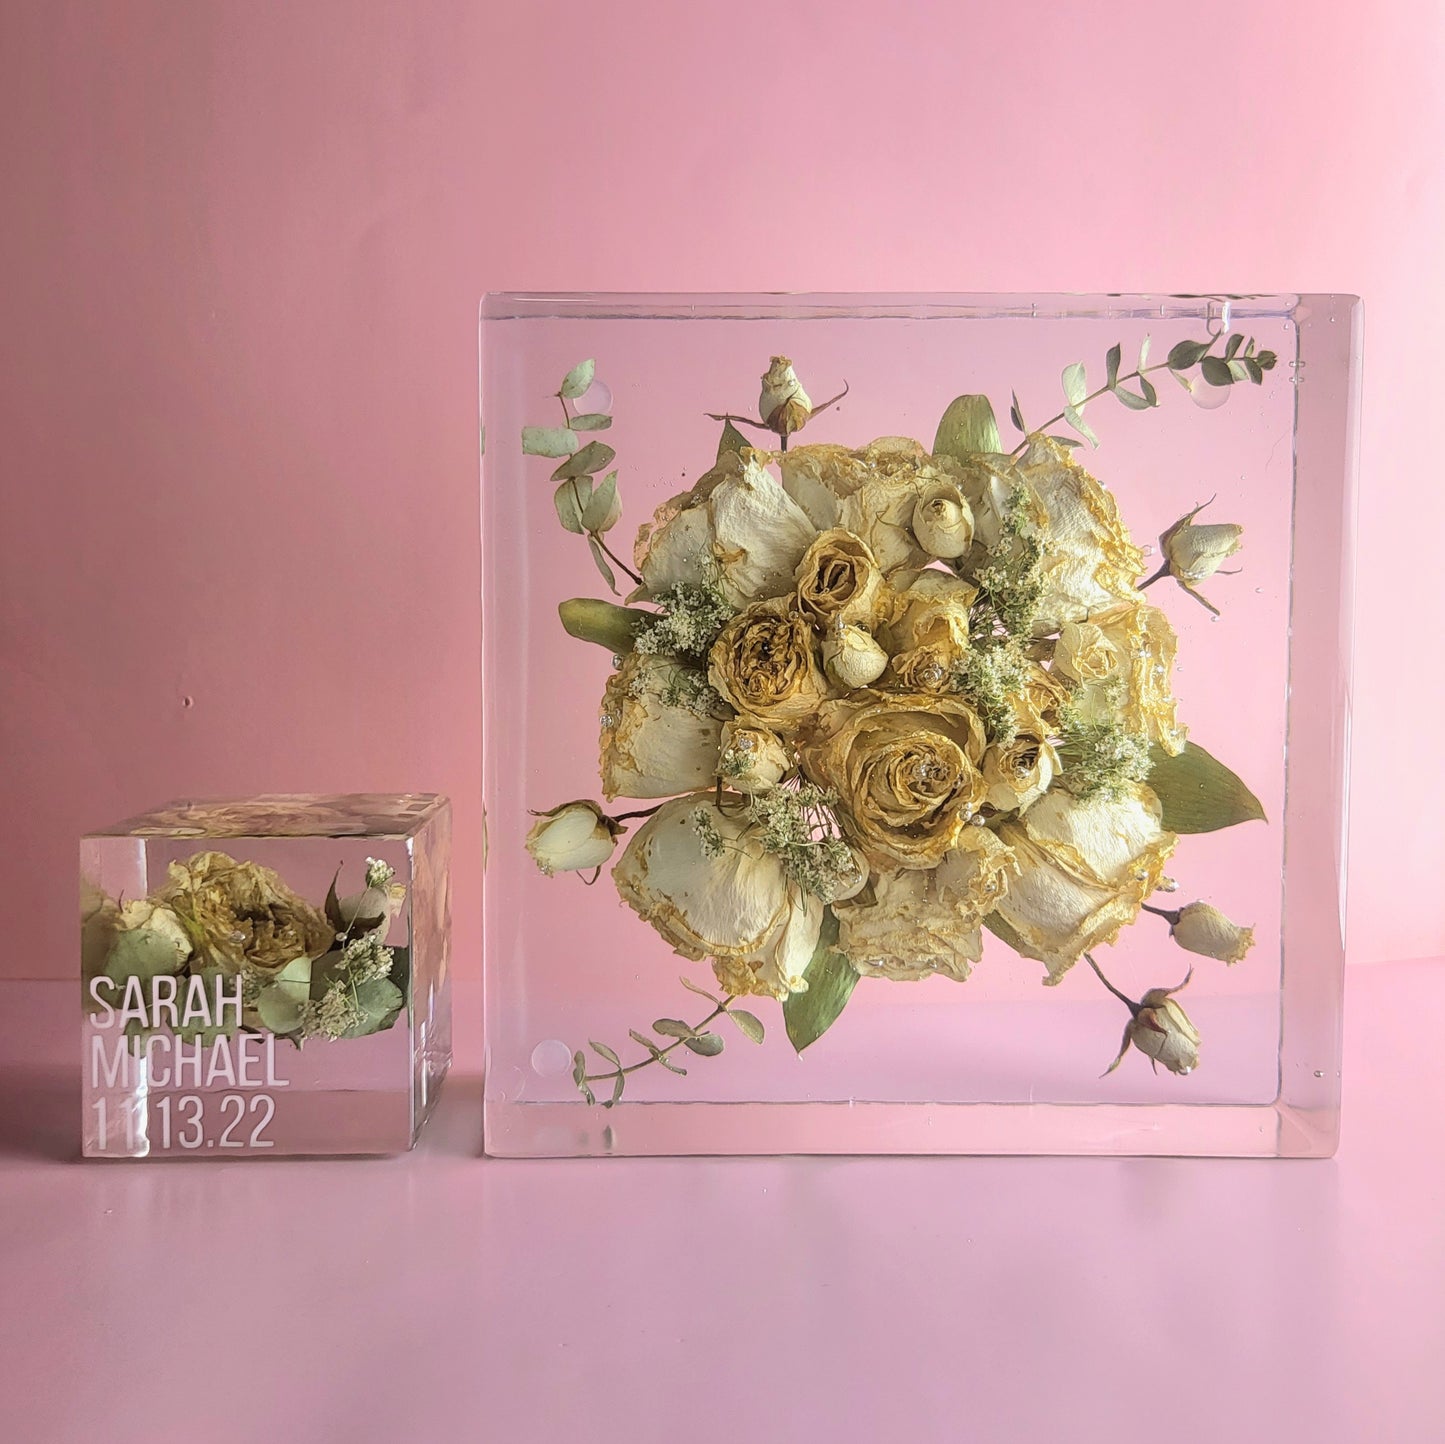 8"x 8" Pre-Dried Flowers 3D Floral Resin Cube Wedding Bouquet Preservation Modern Fried Flowers Square Save Your Gift Keepsake - flofloflowery